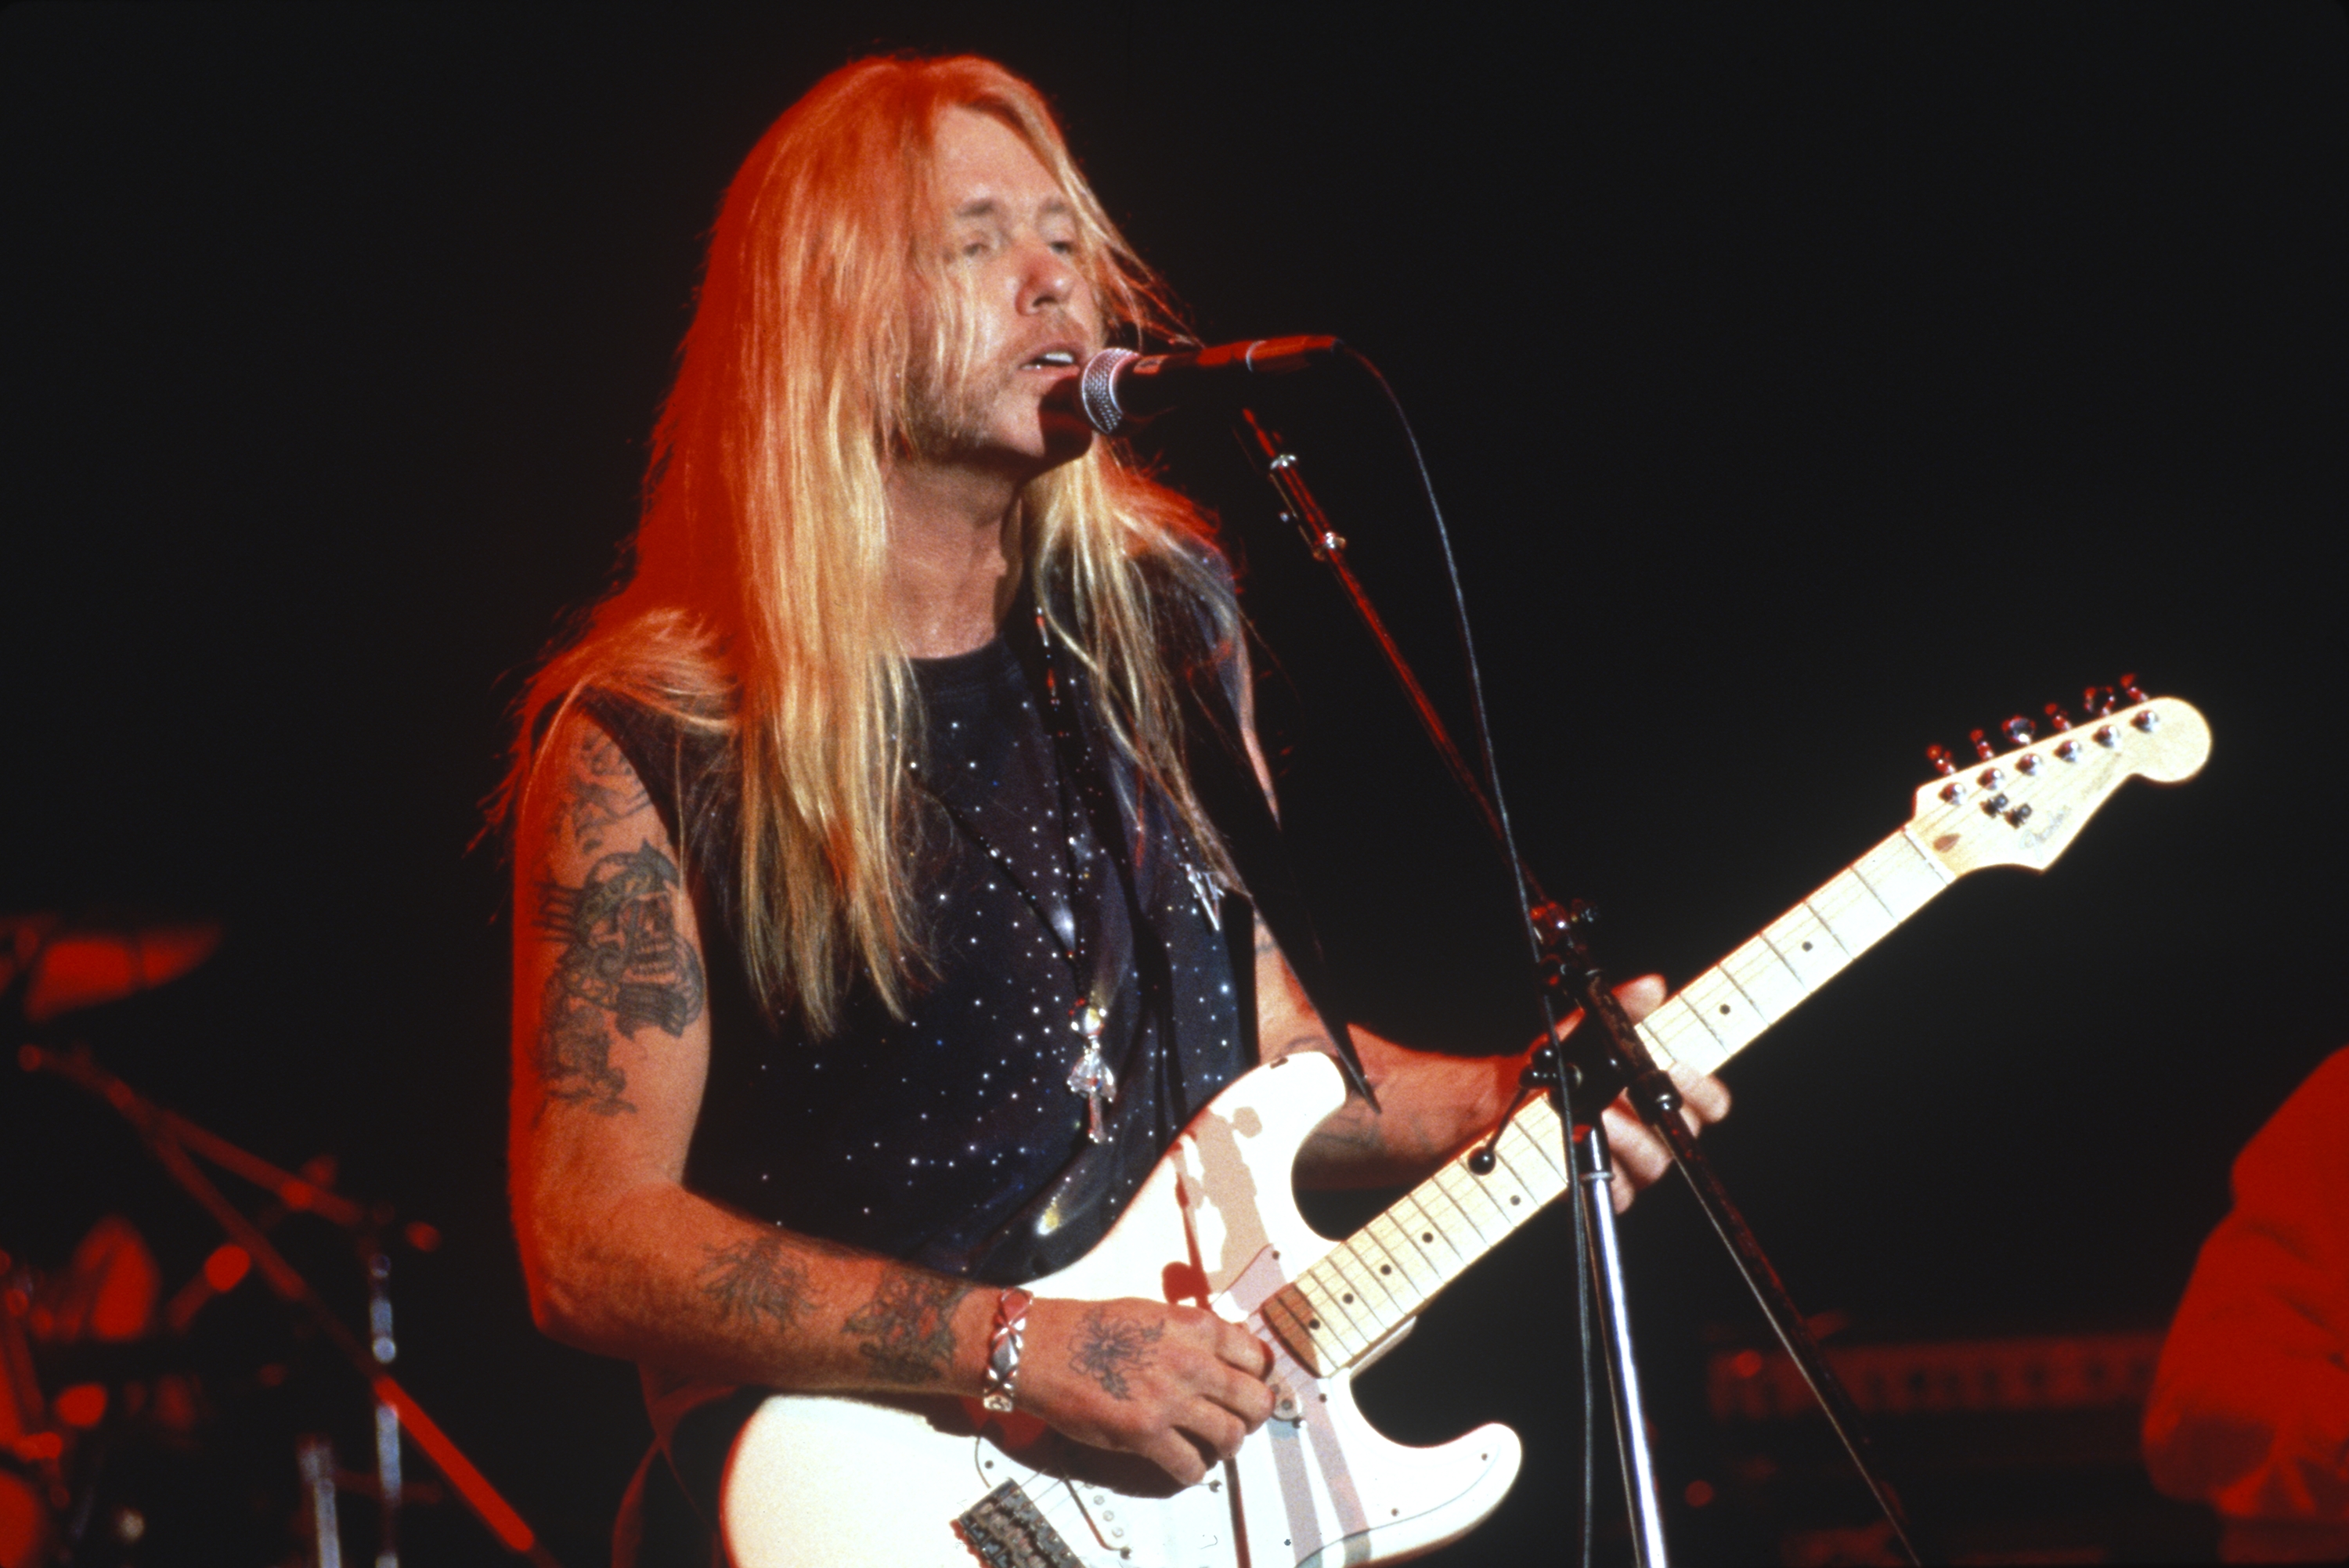 Greg Allman performing at the South Bay Blues Awards on November 7, 1993, in San Jose, California. | Source: Getty Images